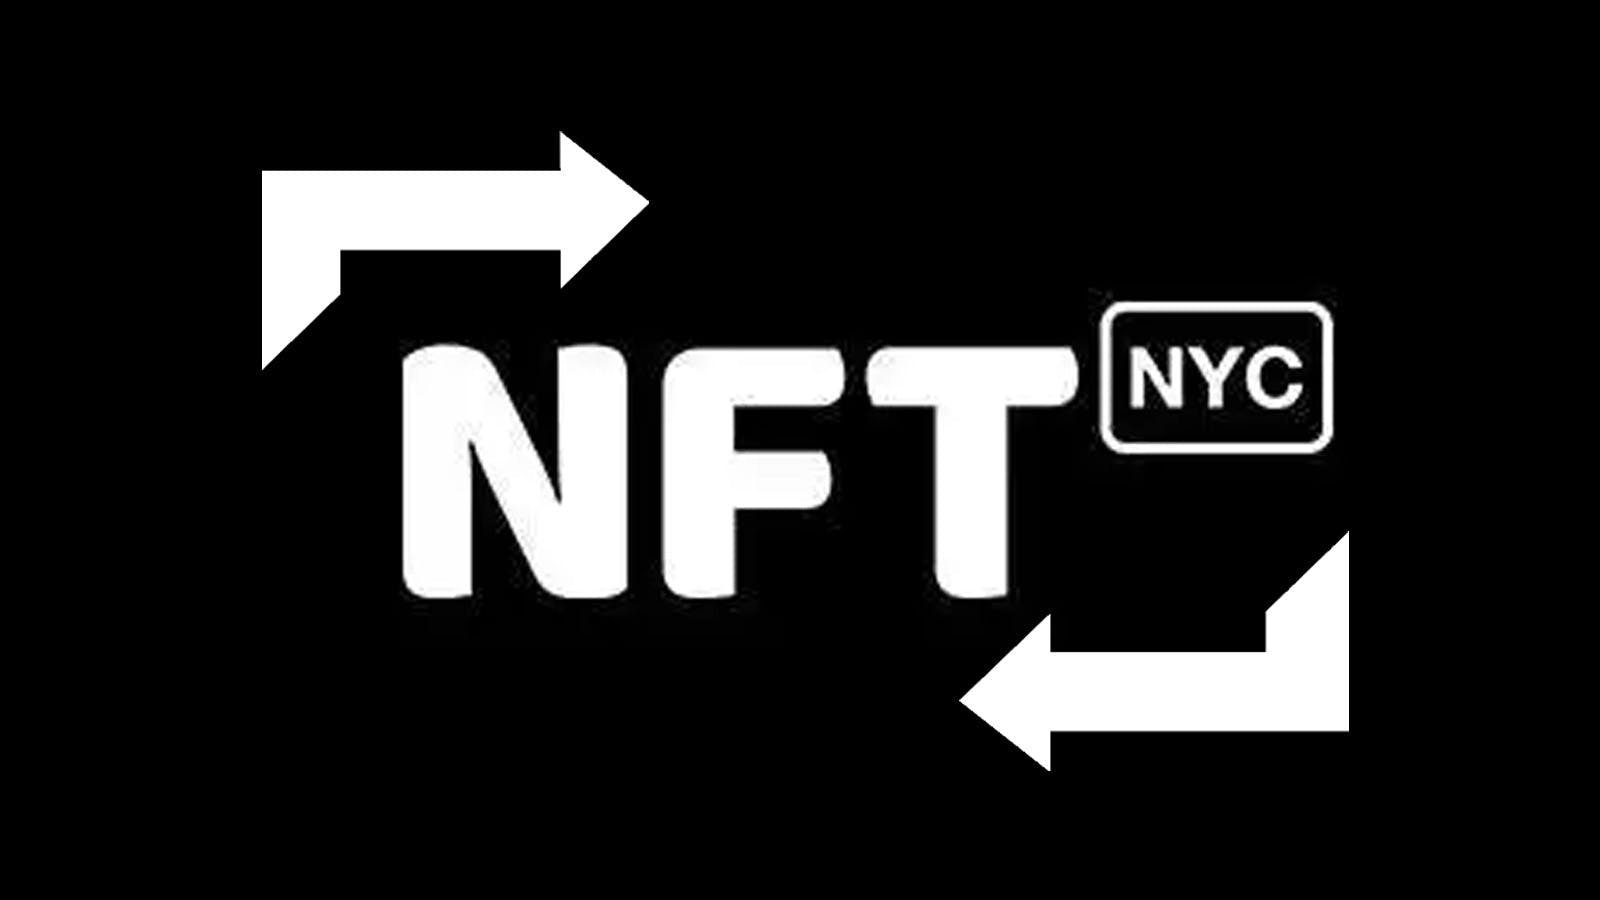 NFT NYC Roundup - The Good, The Bad And The Cringe